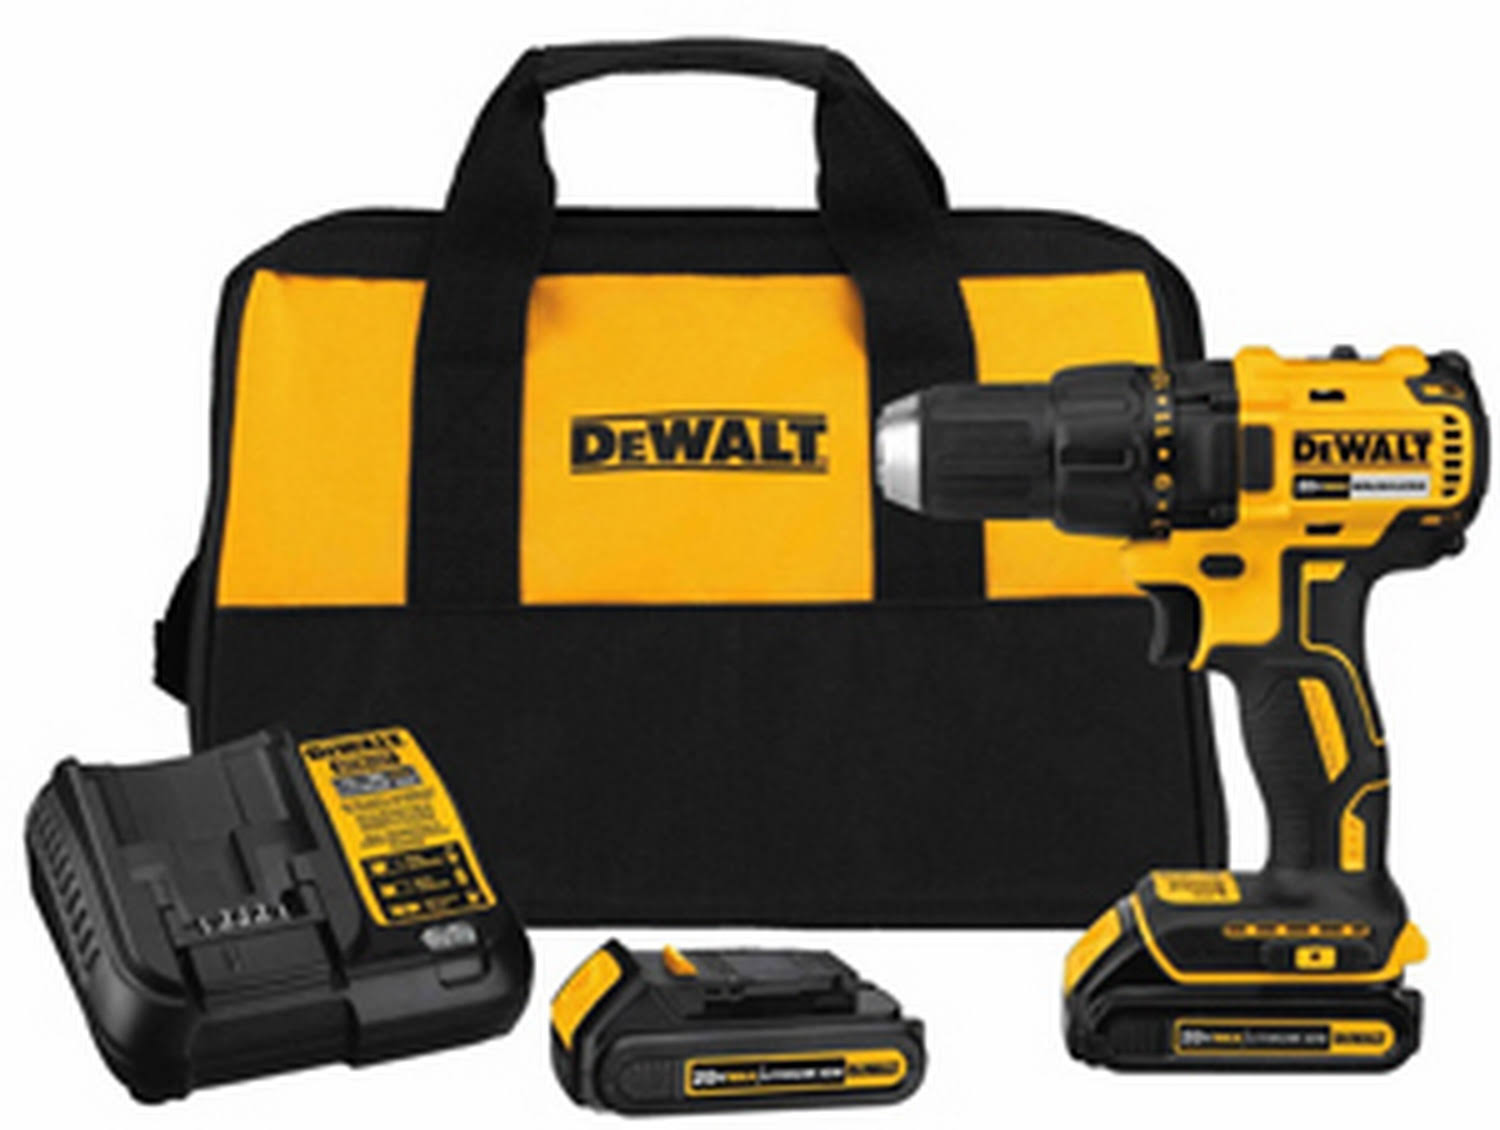 Dewalt DCD777C2 Brushless Compact Drill Driver - 20v Max Lithium-Ion